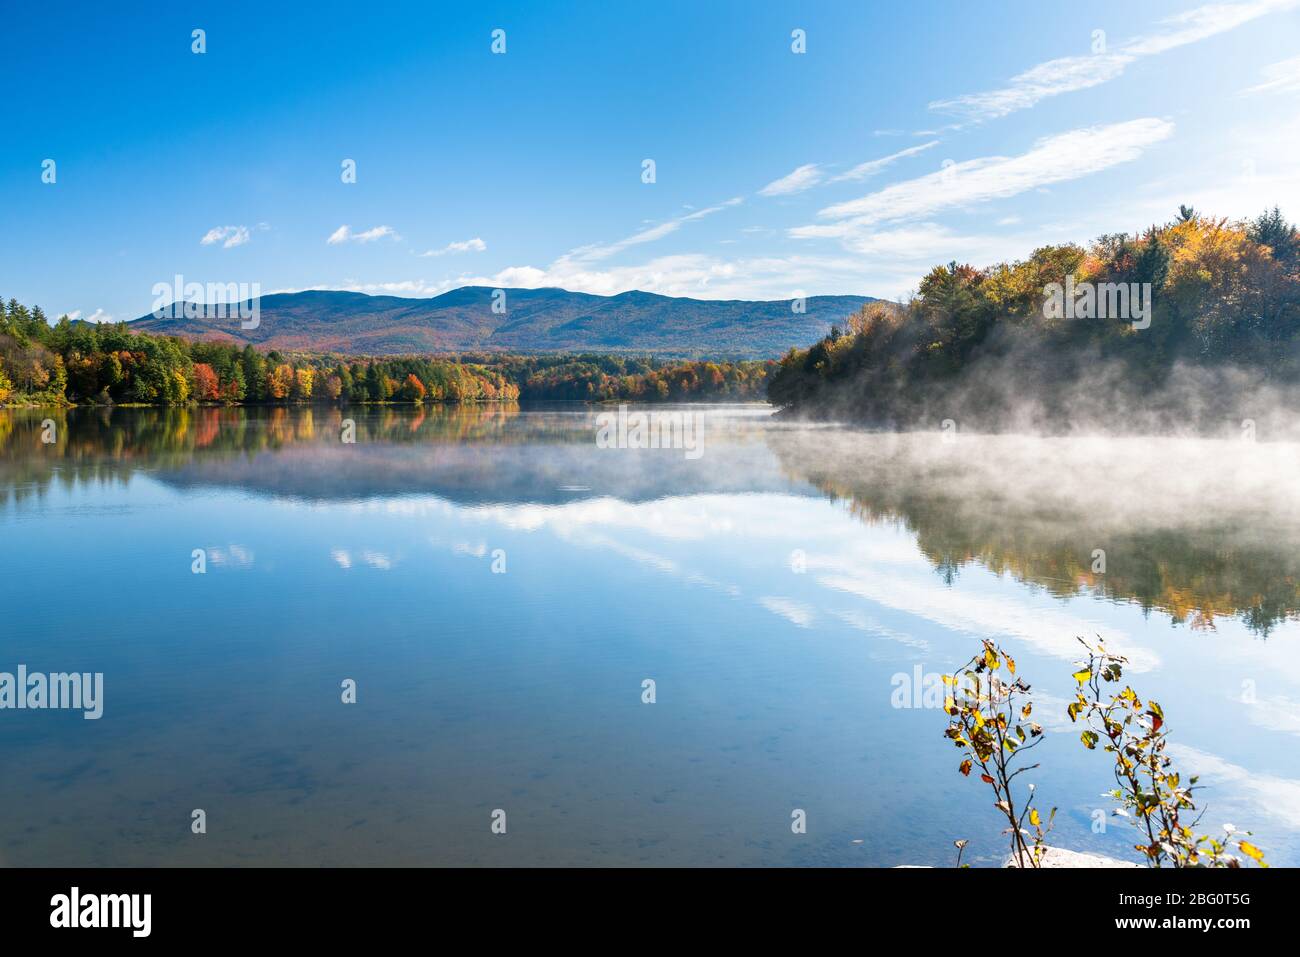 Lake with fog lifting from the water surface  in a magnificent forested mountain landscape on a sunny autumn morning. Stunniong fall foliage. Stock Photo